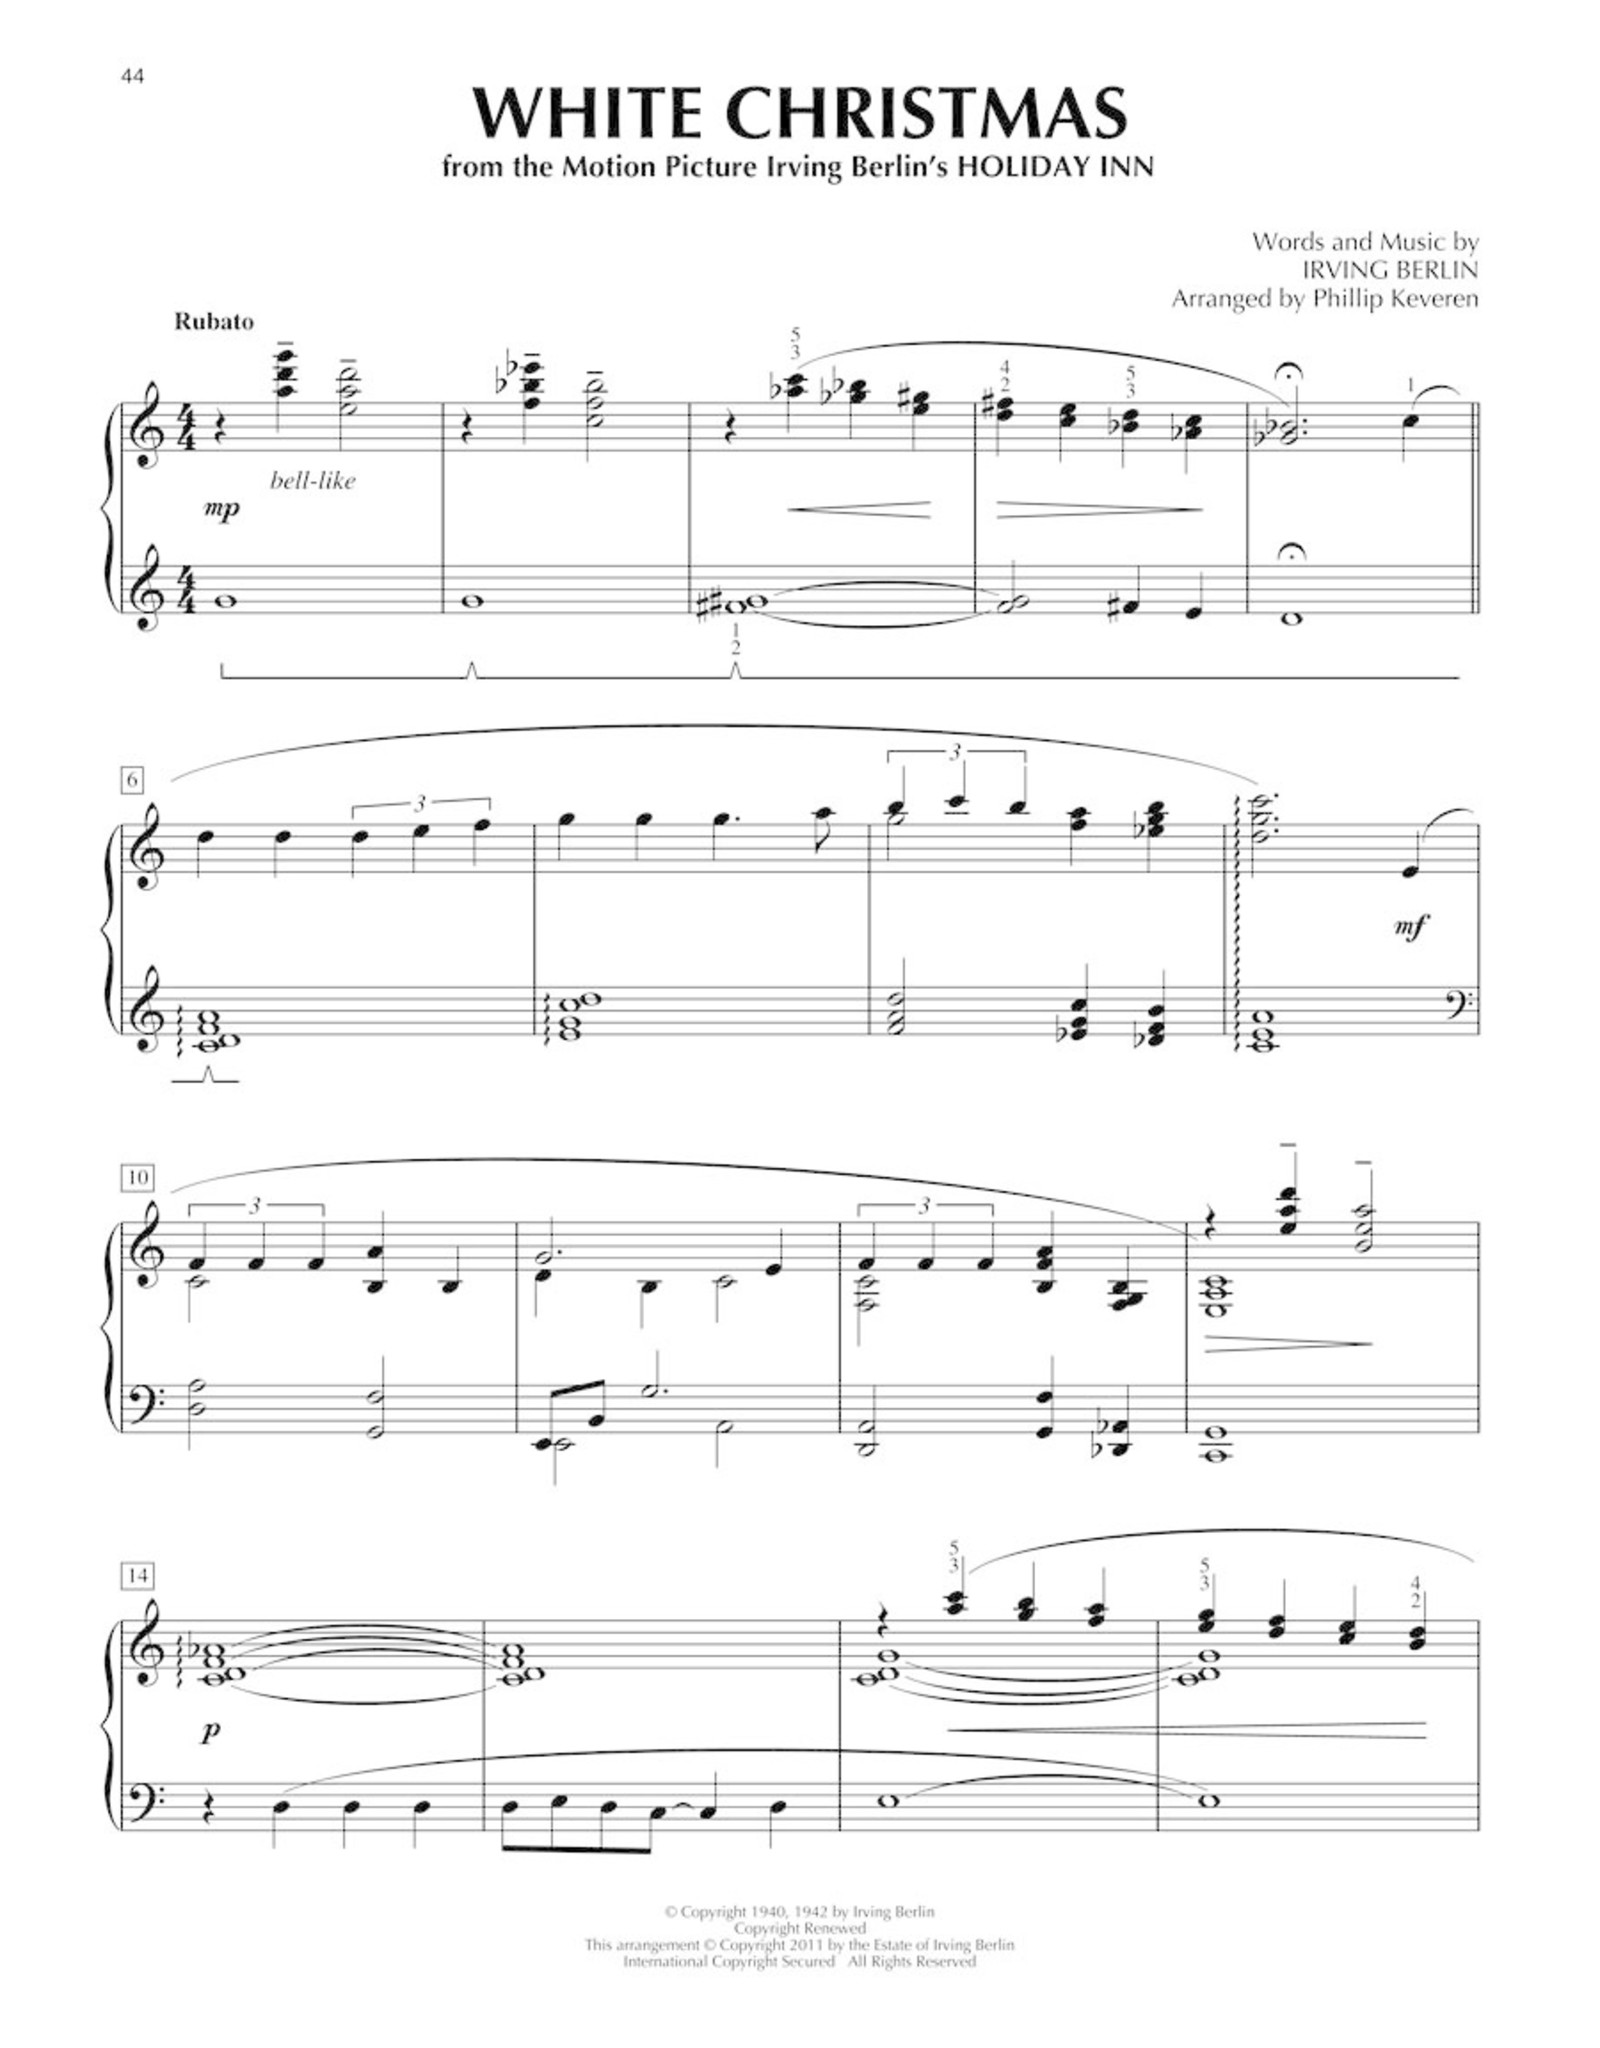 Hal Leonard Christmas at the Movies arr. Phillip Keveren - Late Elementary to Intermediate Piano Solos